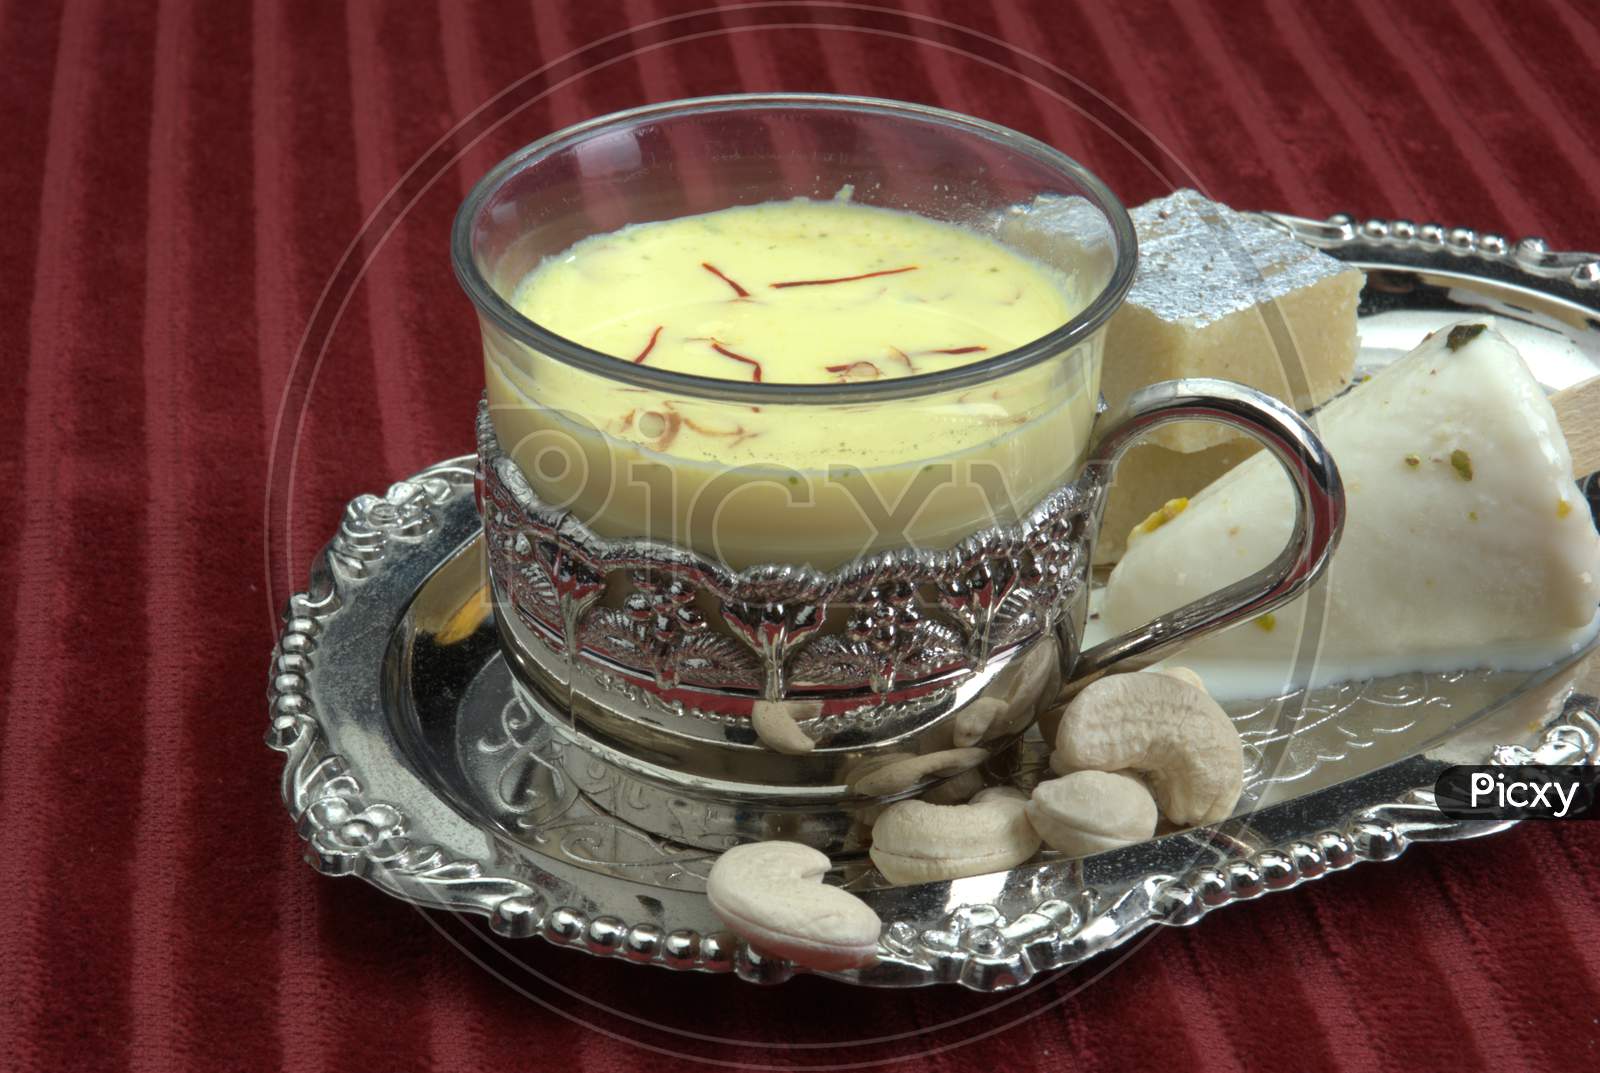 Indian Dessert Condensed Milk With Saffron and Nuts Topping Served in a Bowl